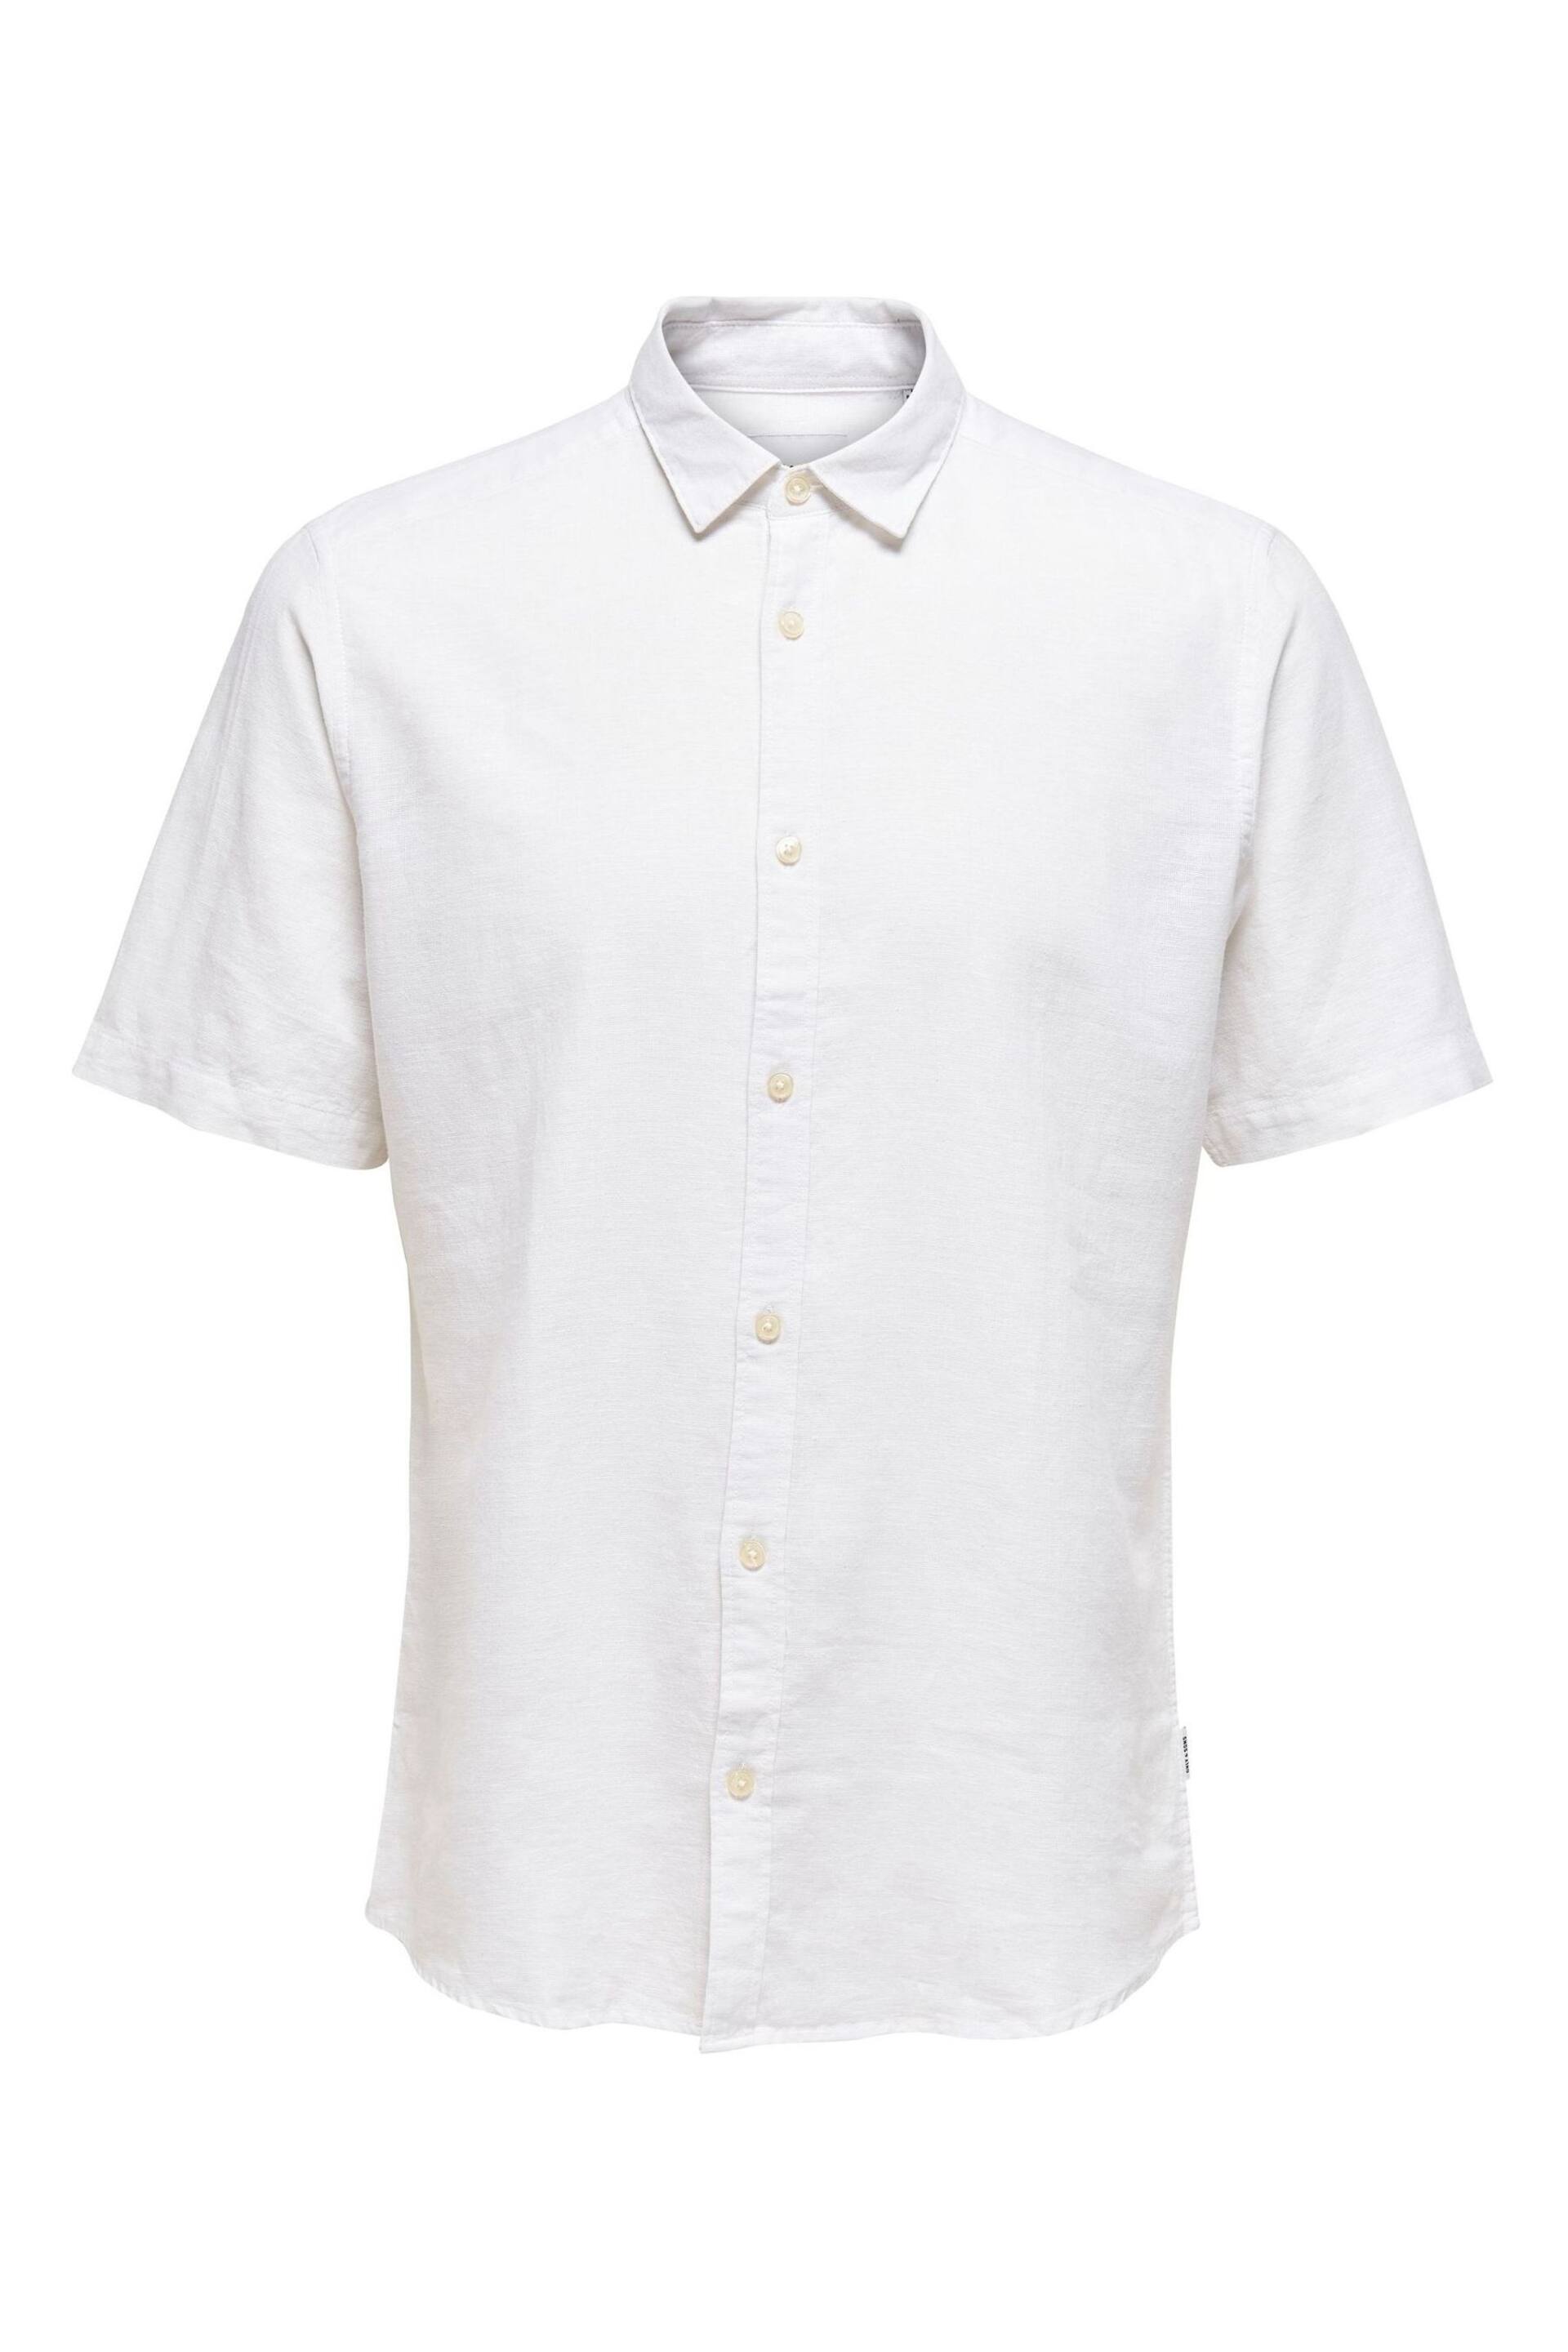 Only & Sons White Short Sleeve Button Up Shirt Contains Linen - Image 5 of 5